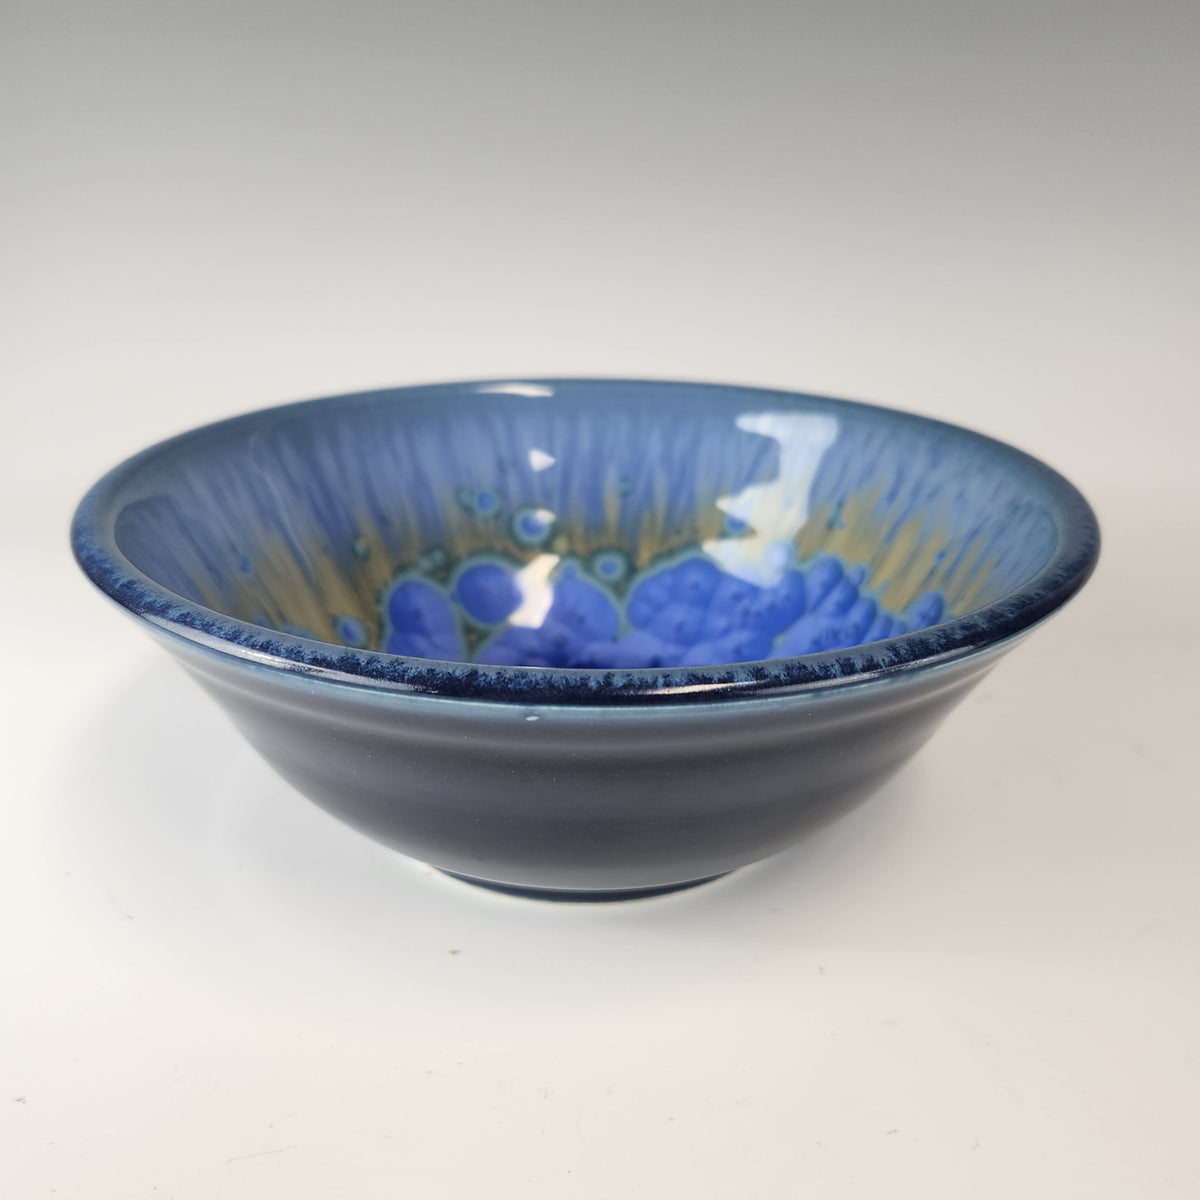 Mini Bowl in Sky Blue - Heart of the Home PA